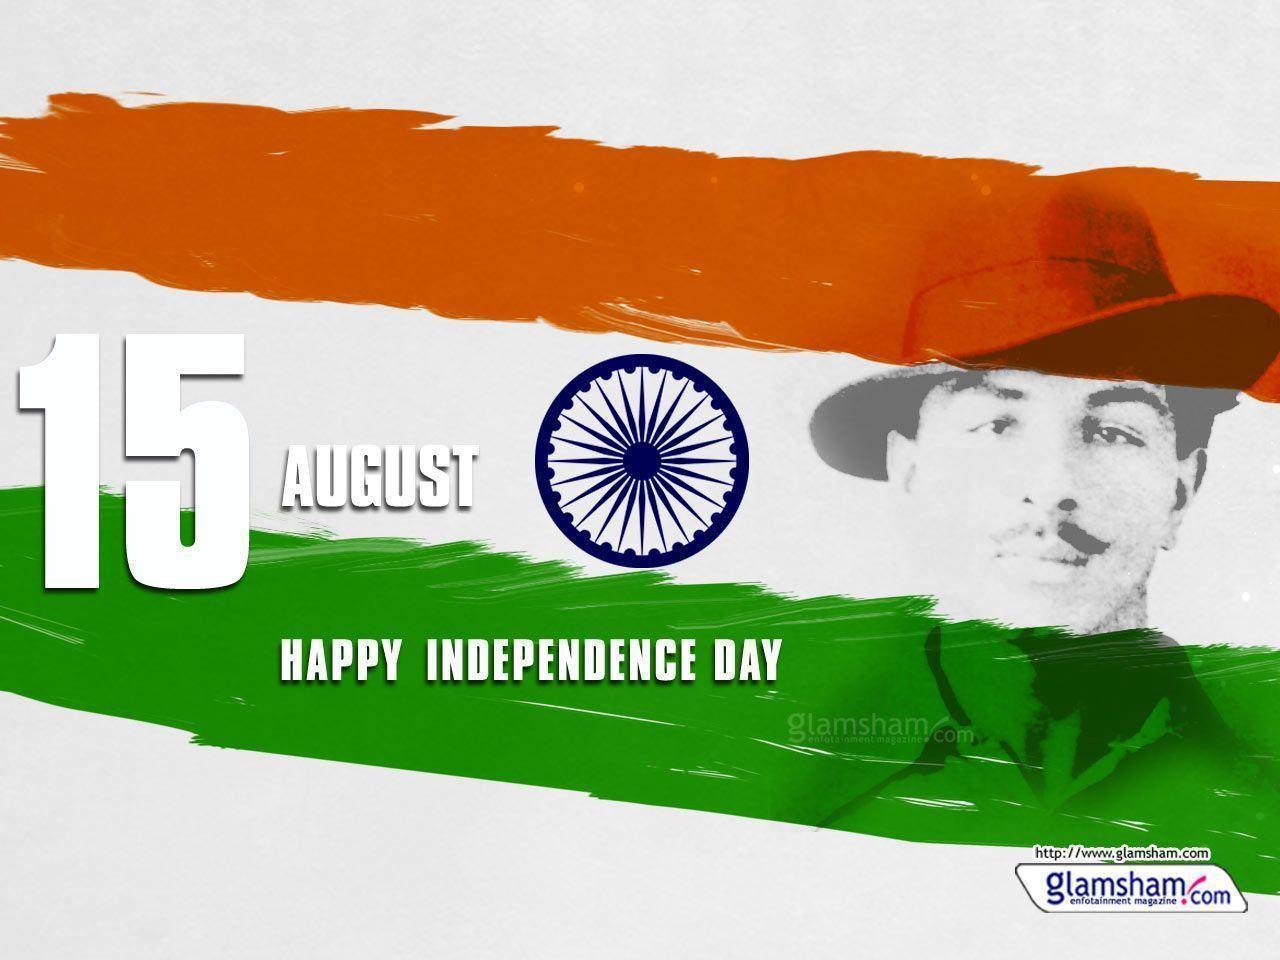 Independence Day Wallpaper HD 2015